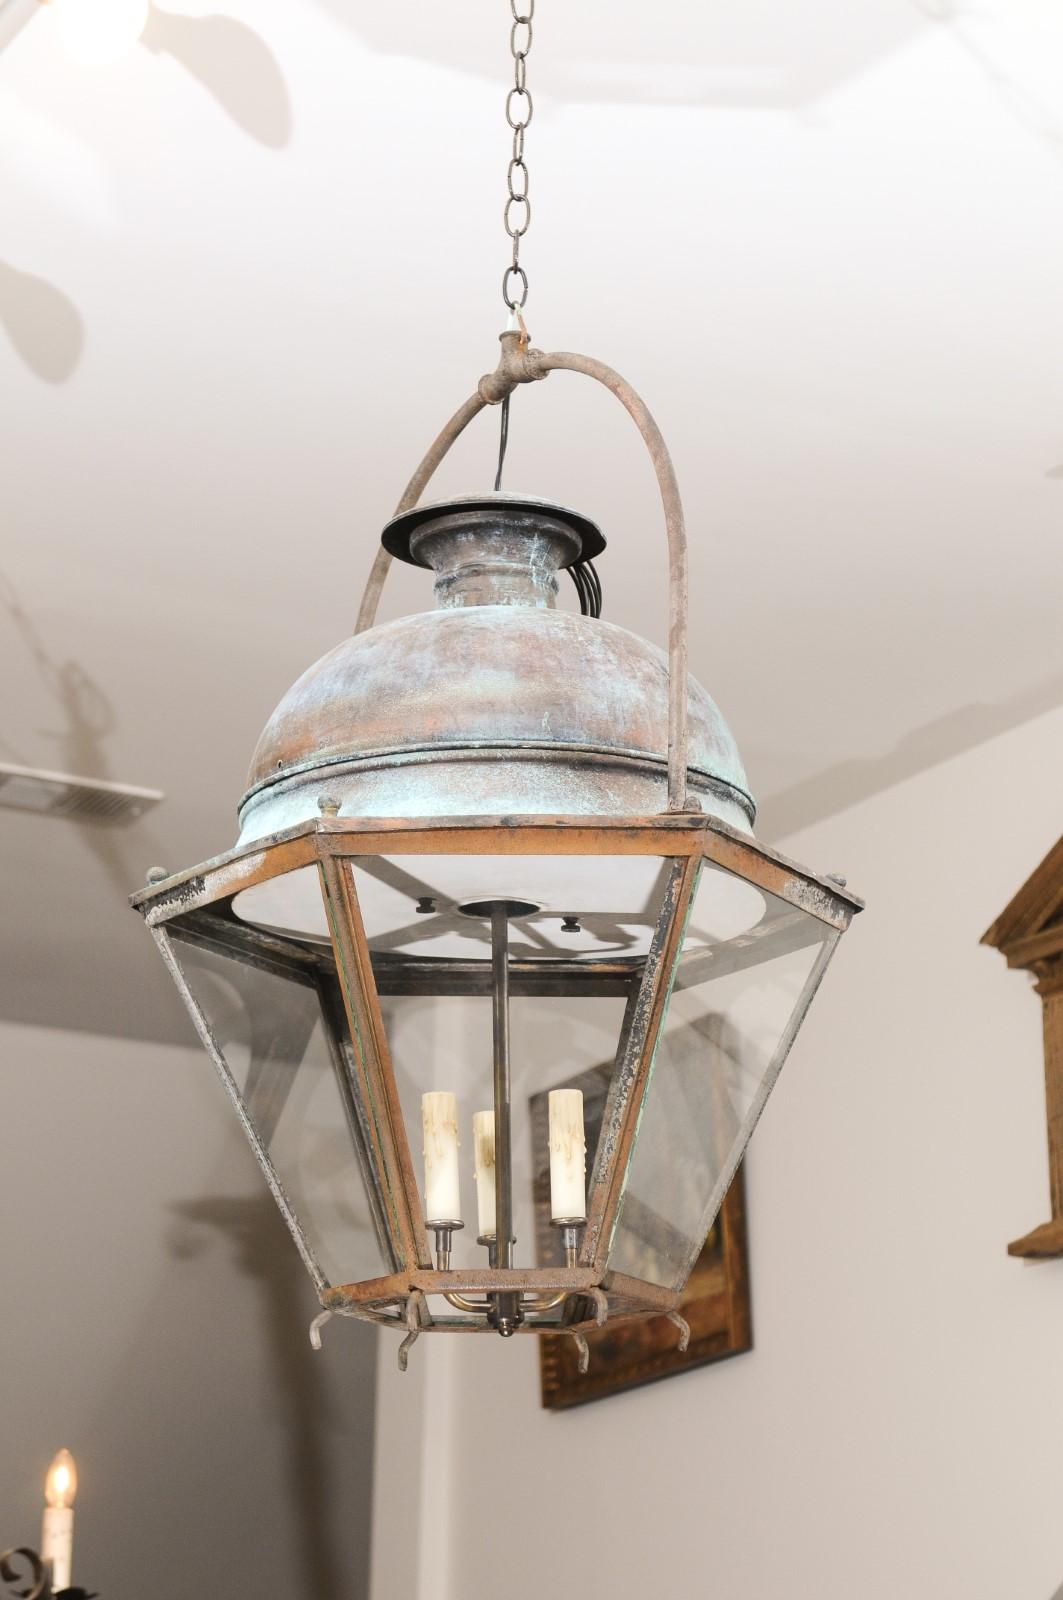 20th Century French Provençal Turn of the Century 1900s Copper and Iron Hexagonal Lantern